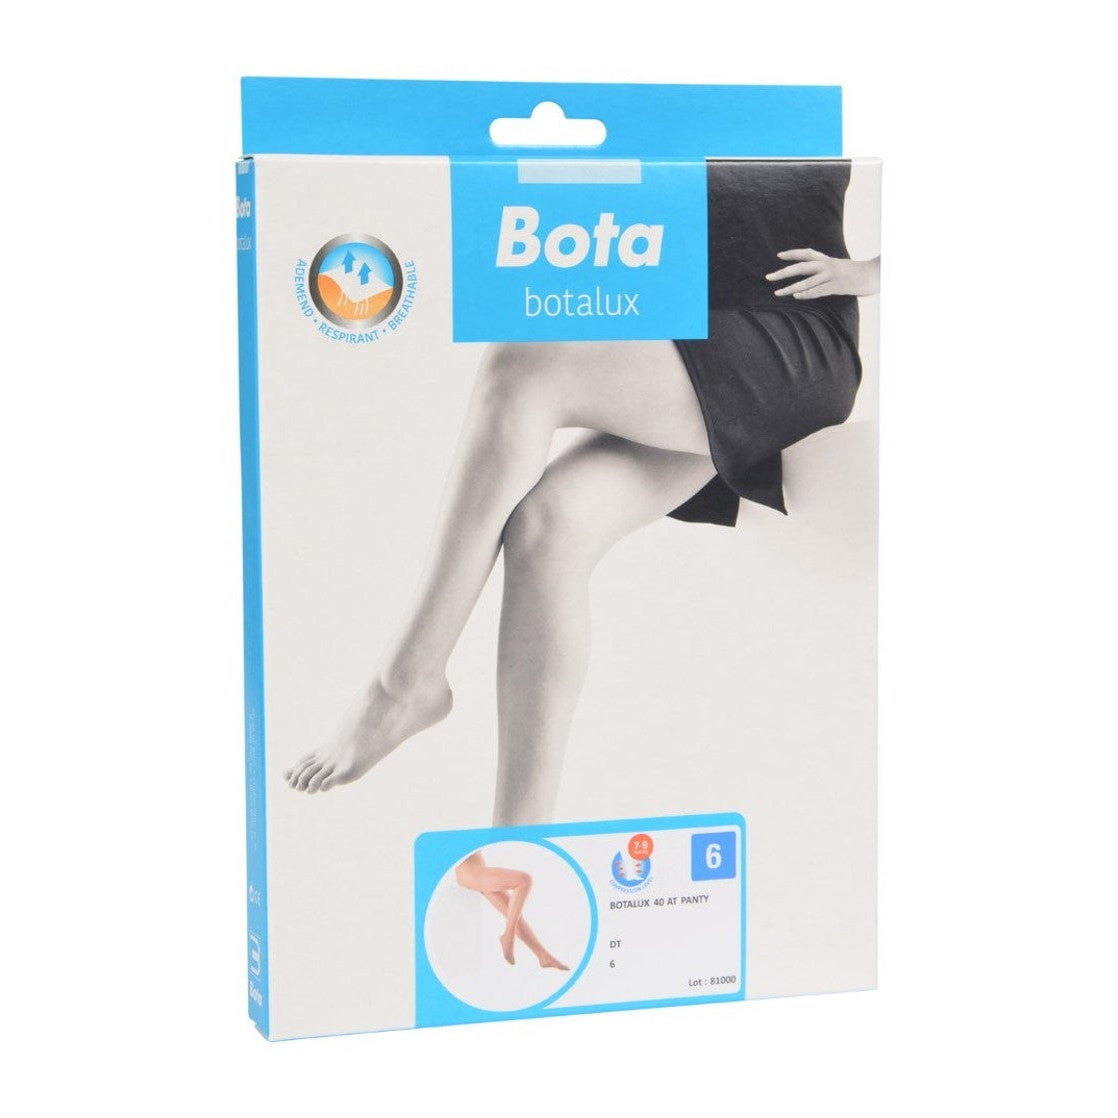 Botalux 40 support tights at dark